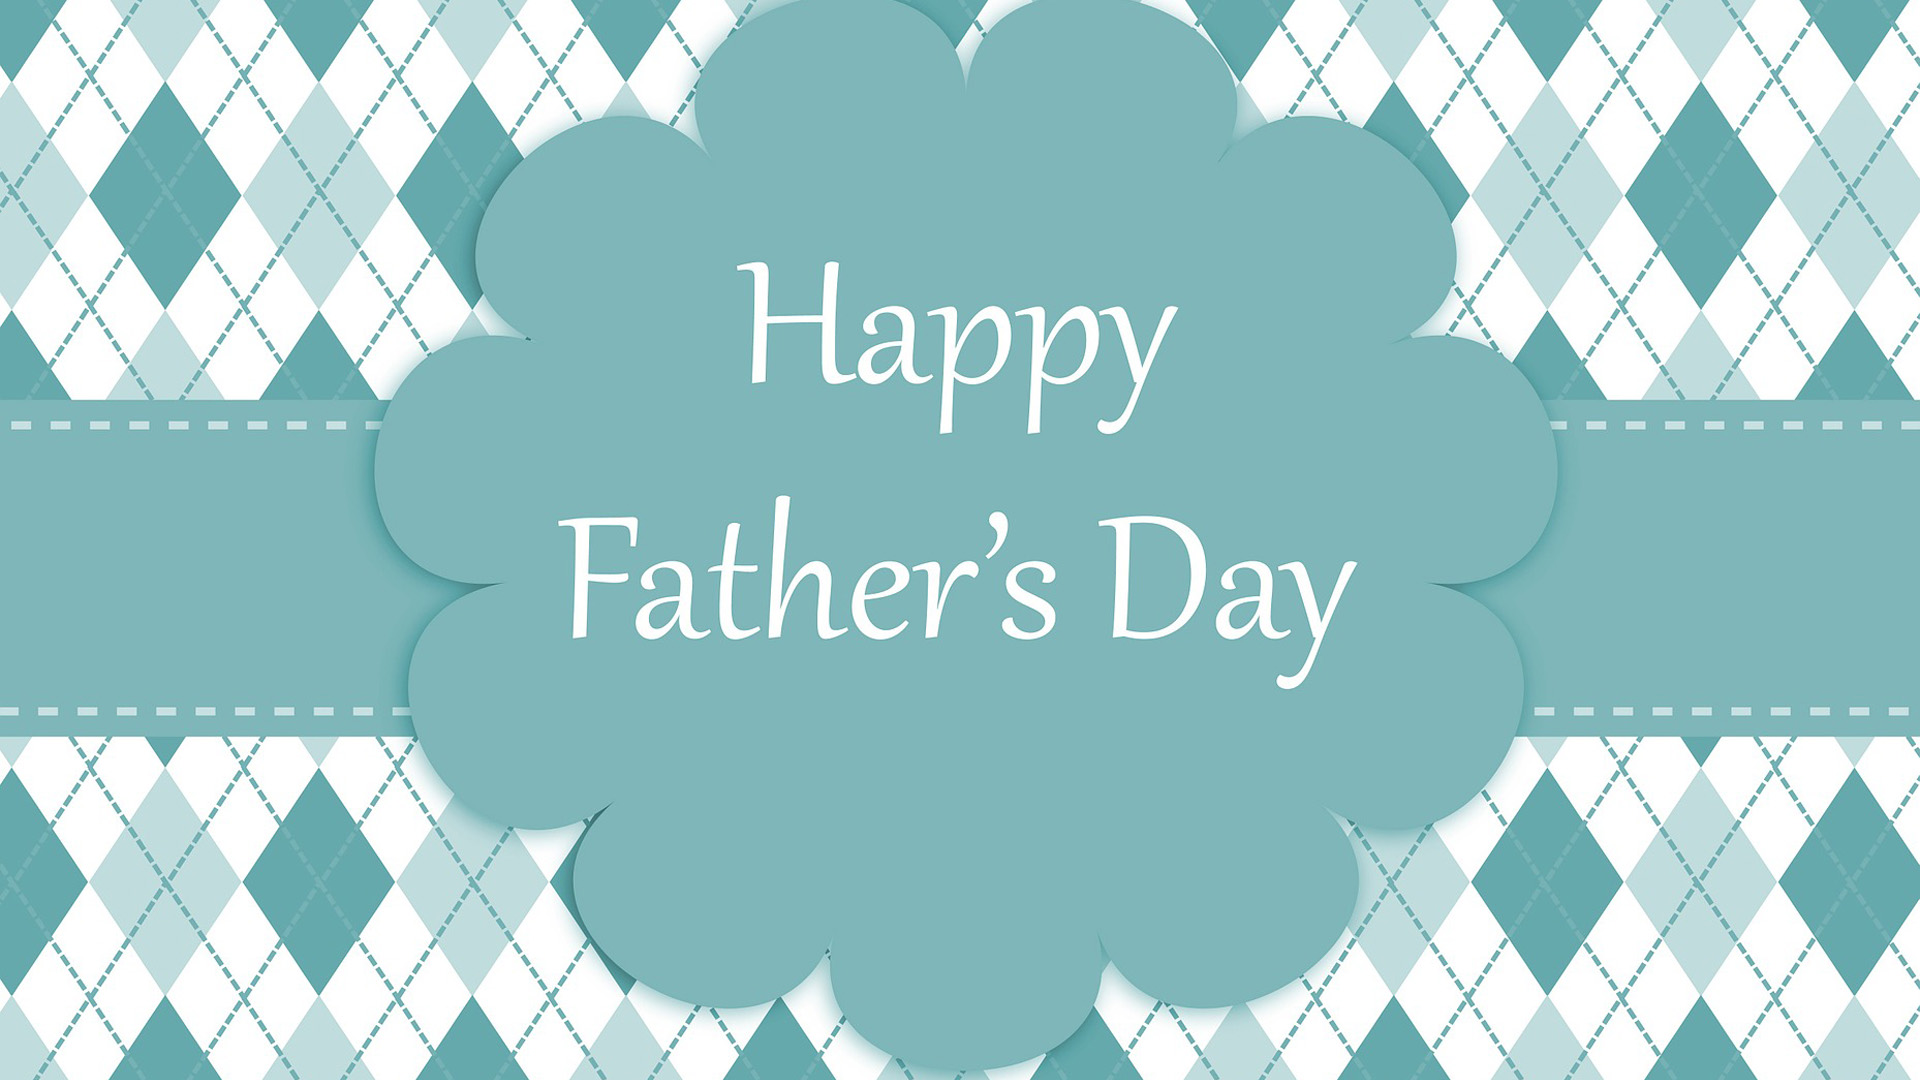 teal and white plaid background with teal bar across the center of the graphic. In the center of the image there is a flower like shape. In the center of the shape it reads Happy Father's Day.